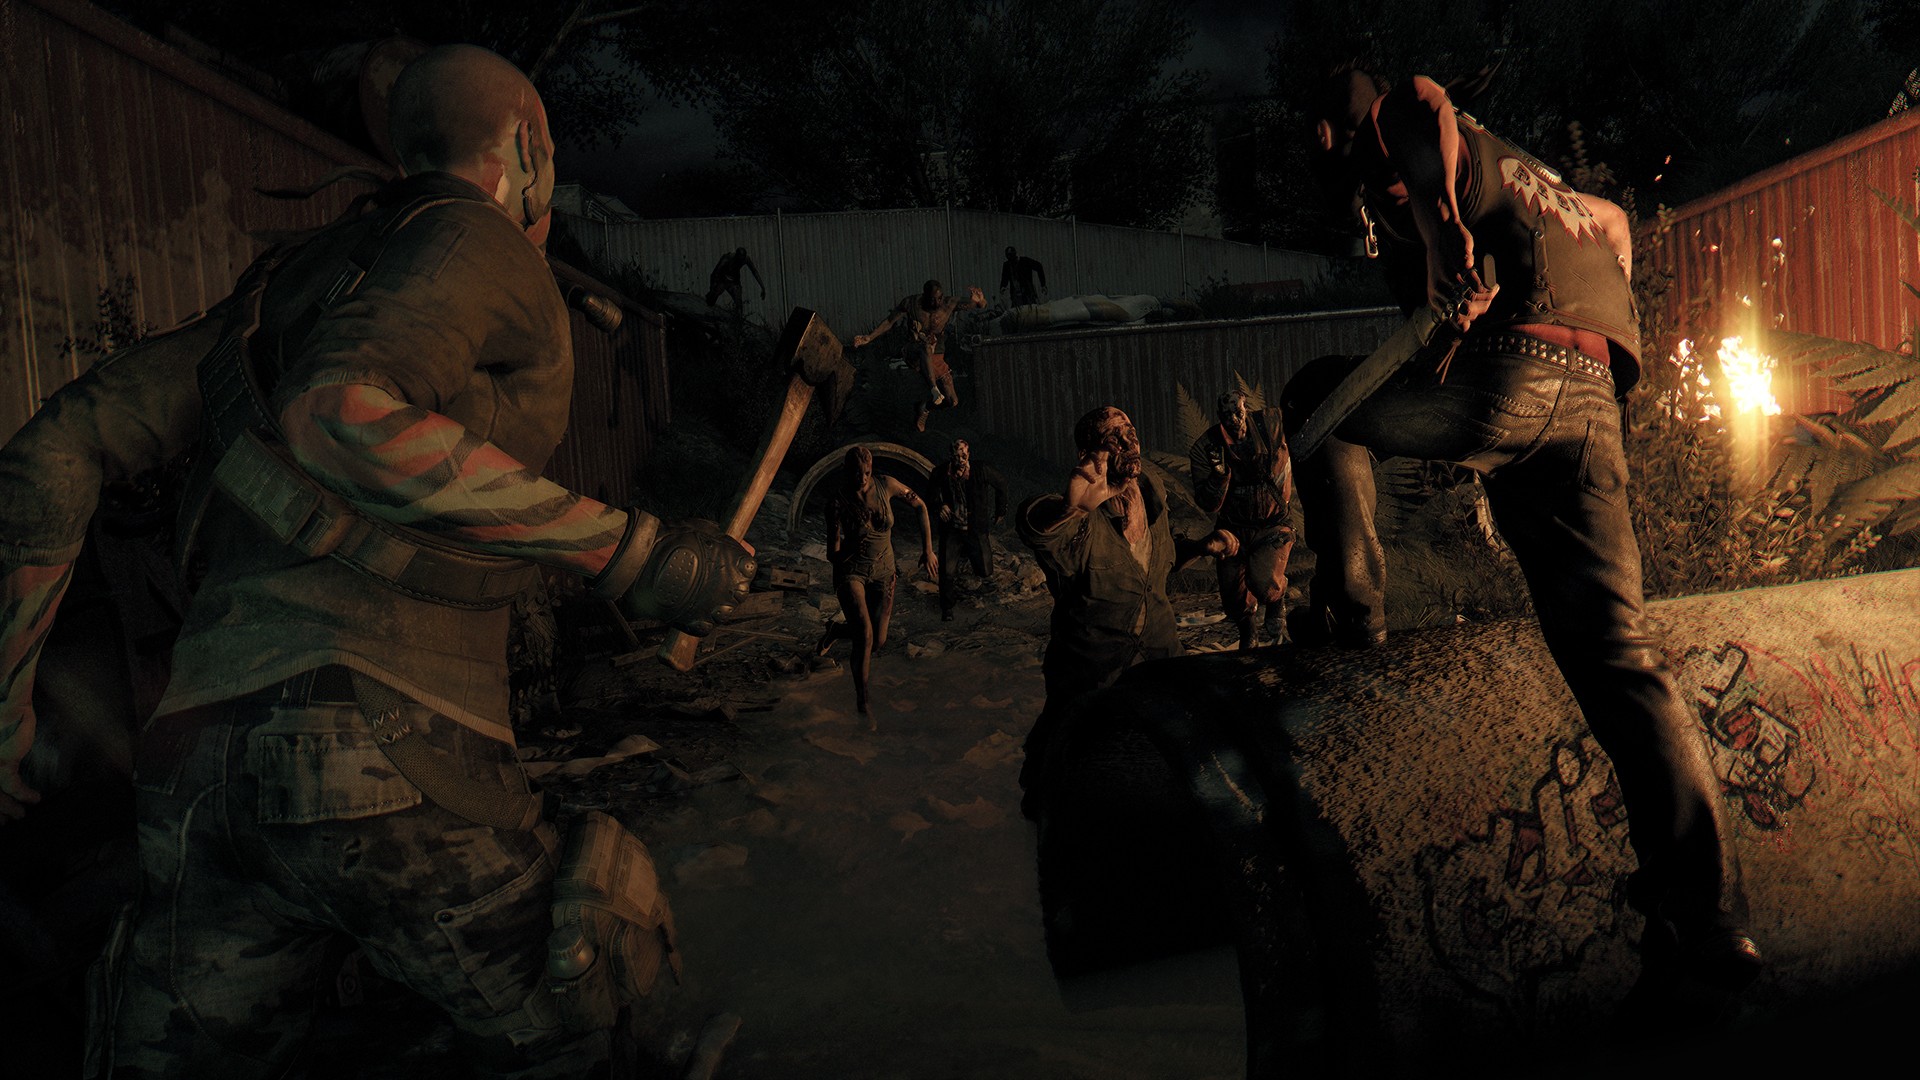 Buy Dying Light: The Following - Enhanced Edition from the Humble